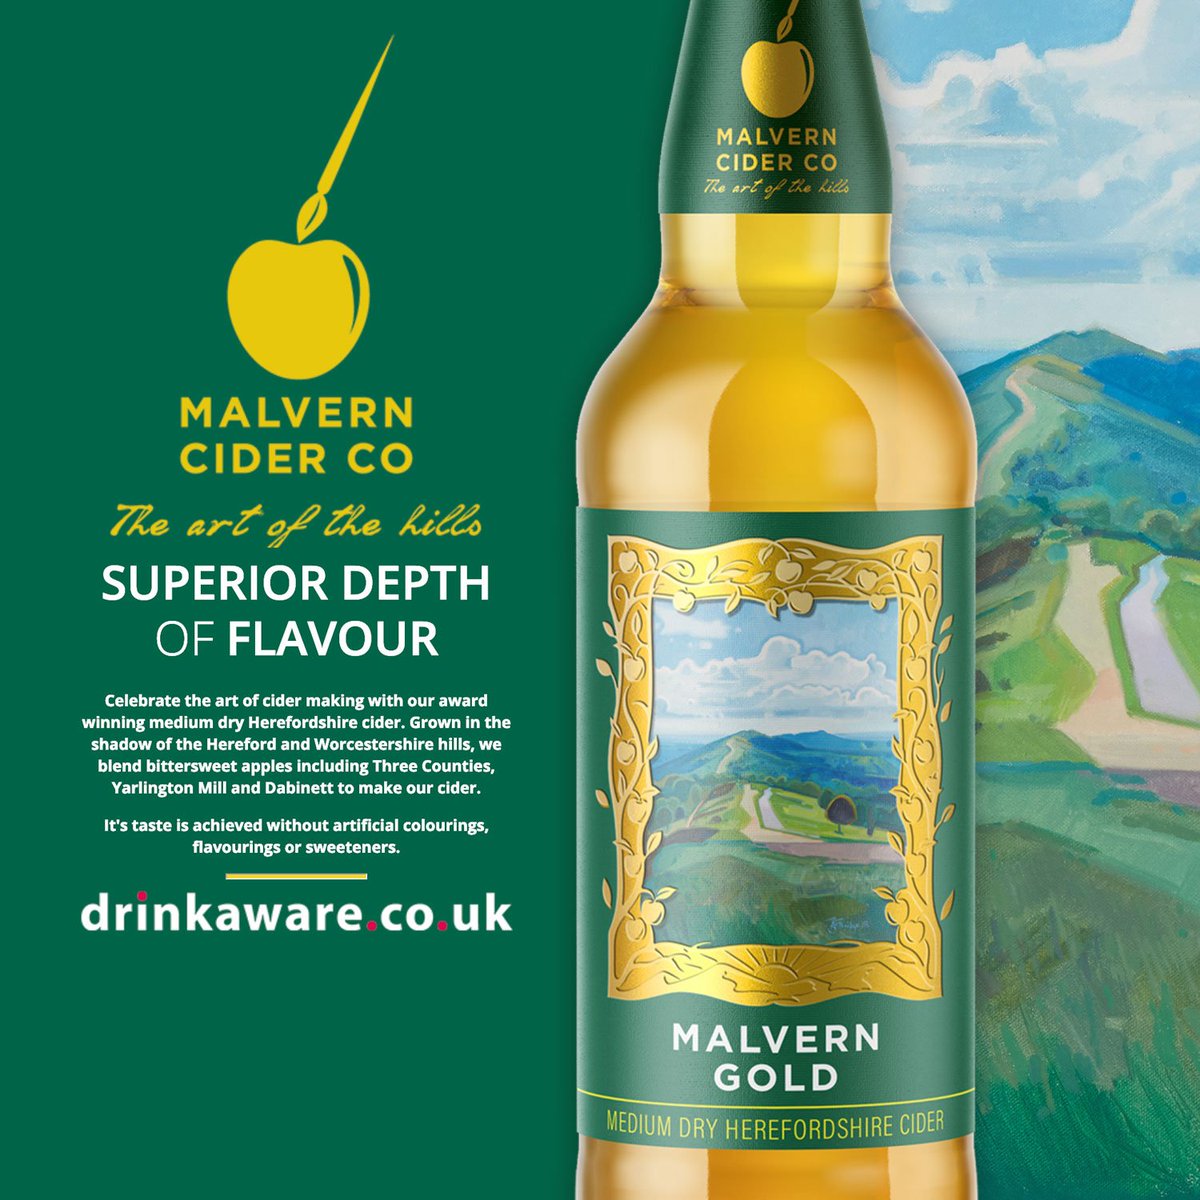 You can now taste the art of the hills! My work features on the new Malvern Gold bottle soon to hit the shops. It is a bottle of true art, craft and love for Malvern. Enjoy!
#malvernciderco #malverncider #vegancider #vegandrink #malverngold #malvernhills #antonybridge